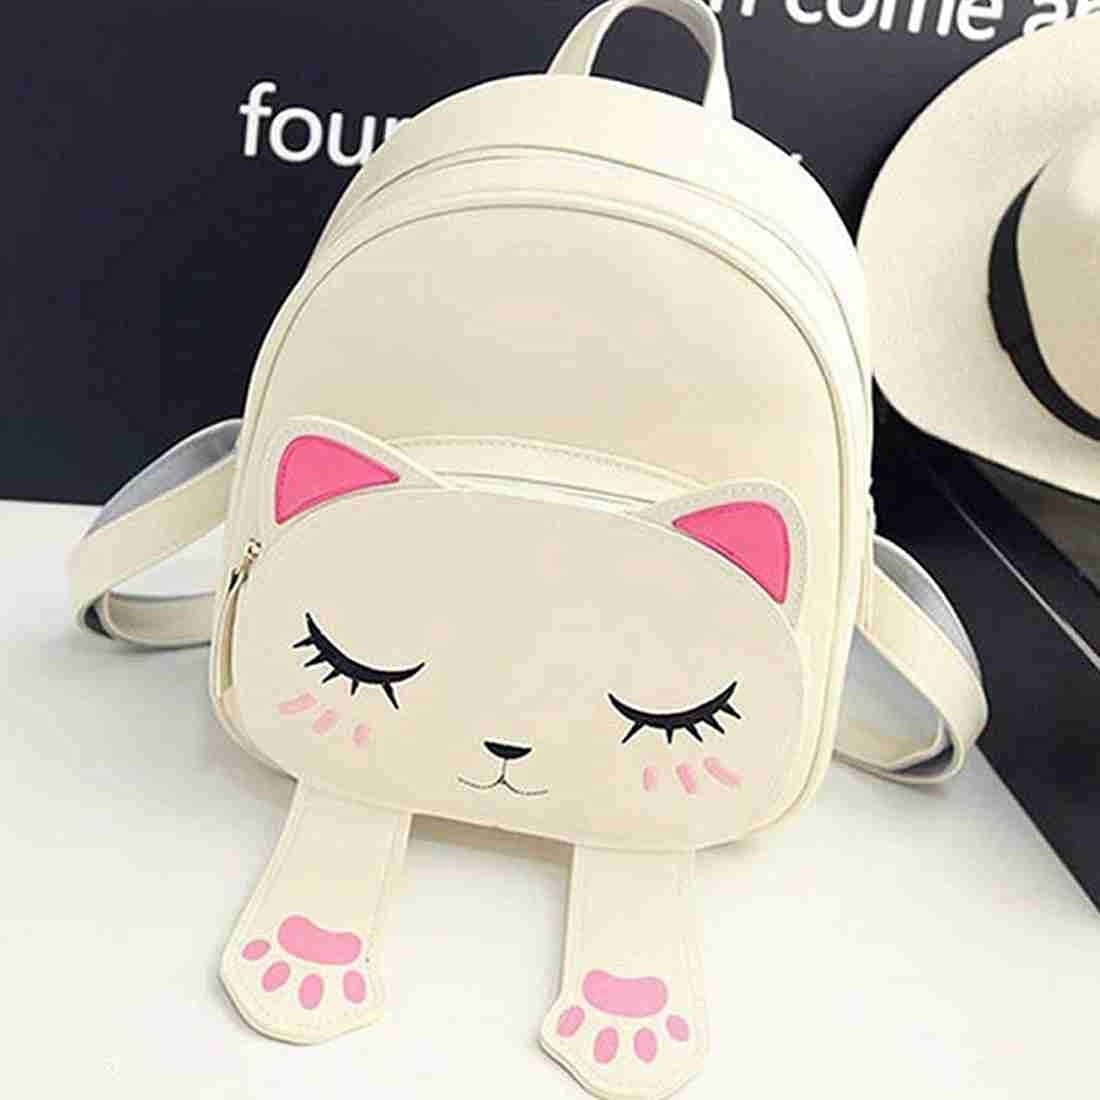 A cat bag on a white surface